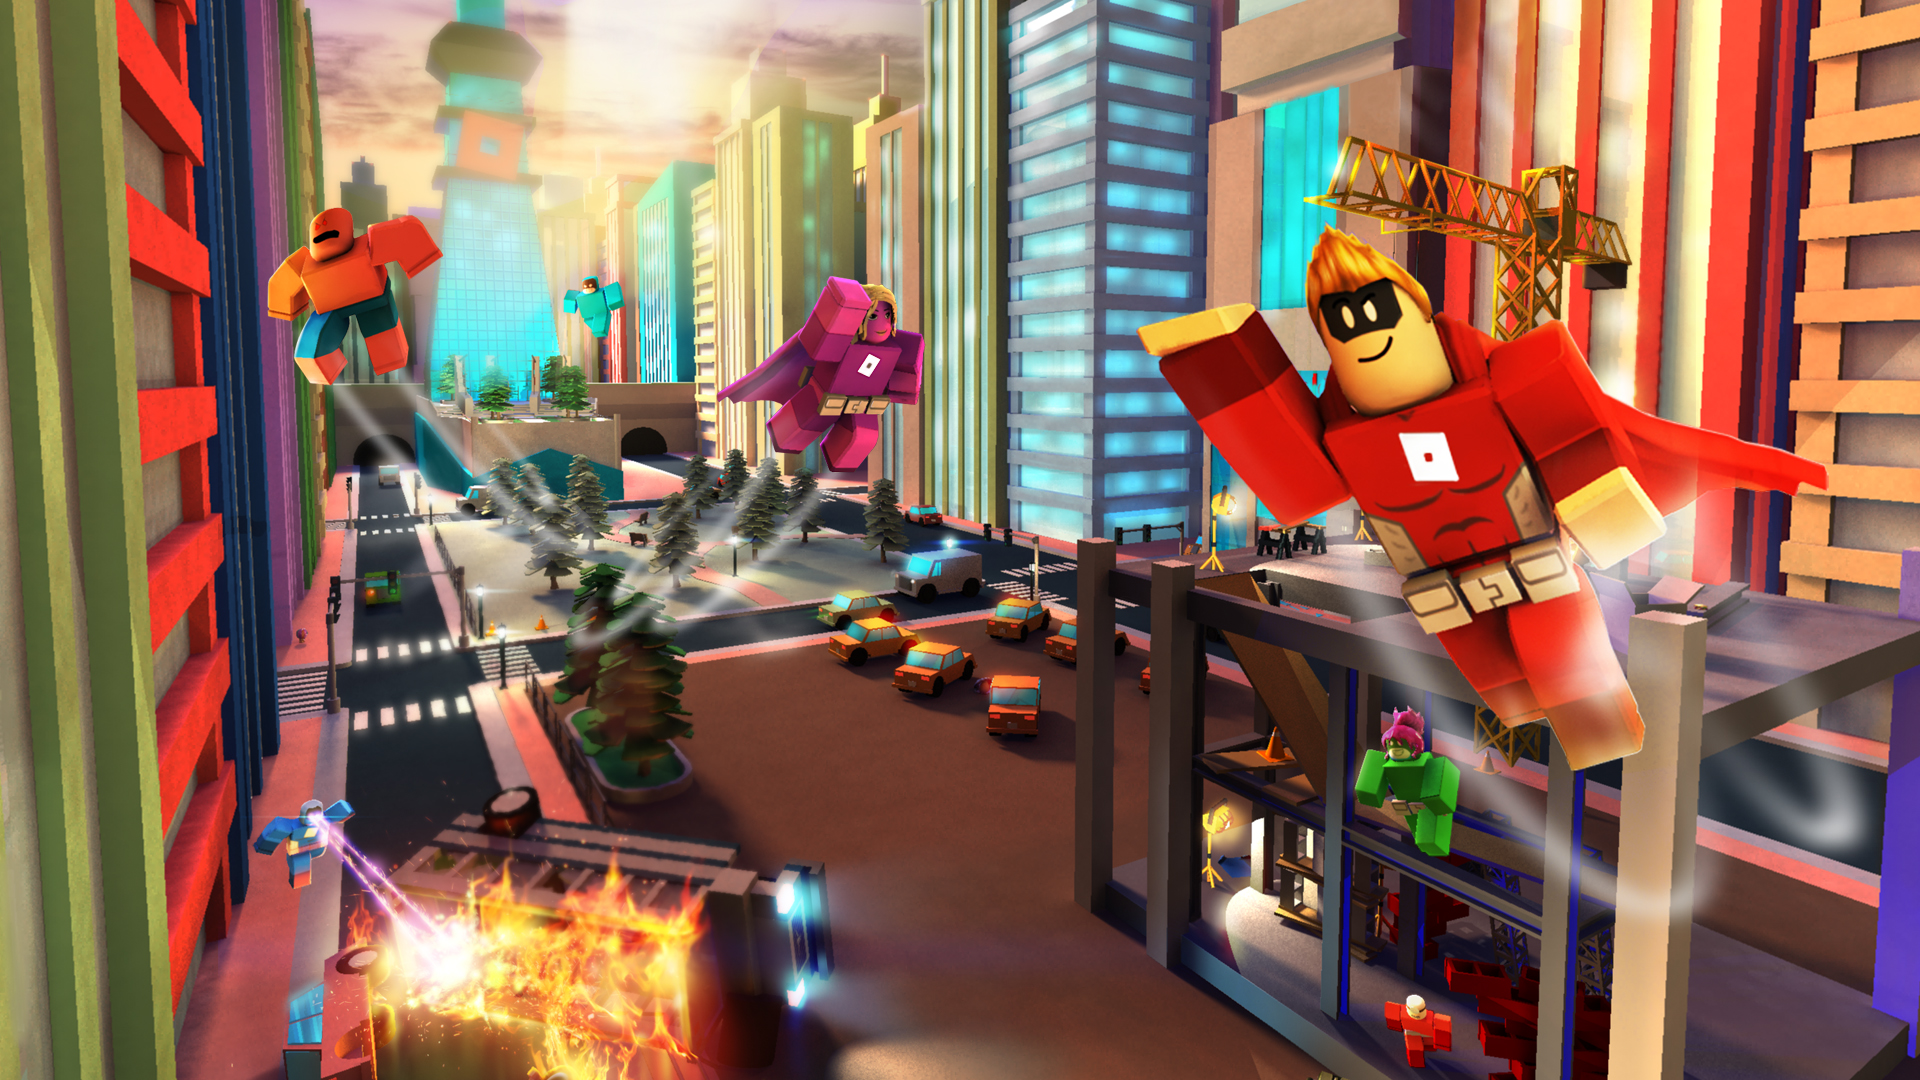 Roblox - Fly up, up, and away to our new Heroes event! From now